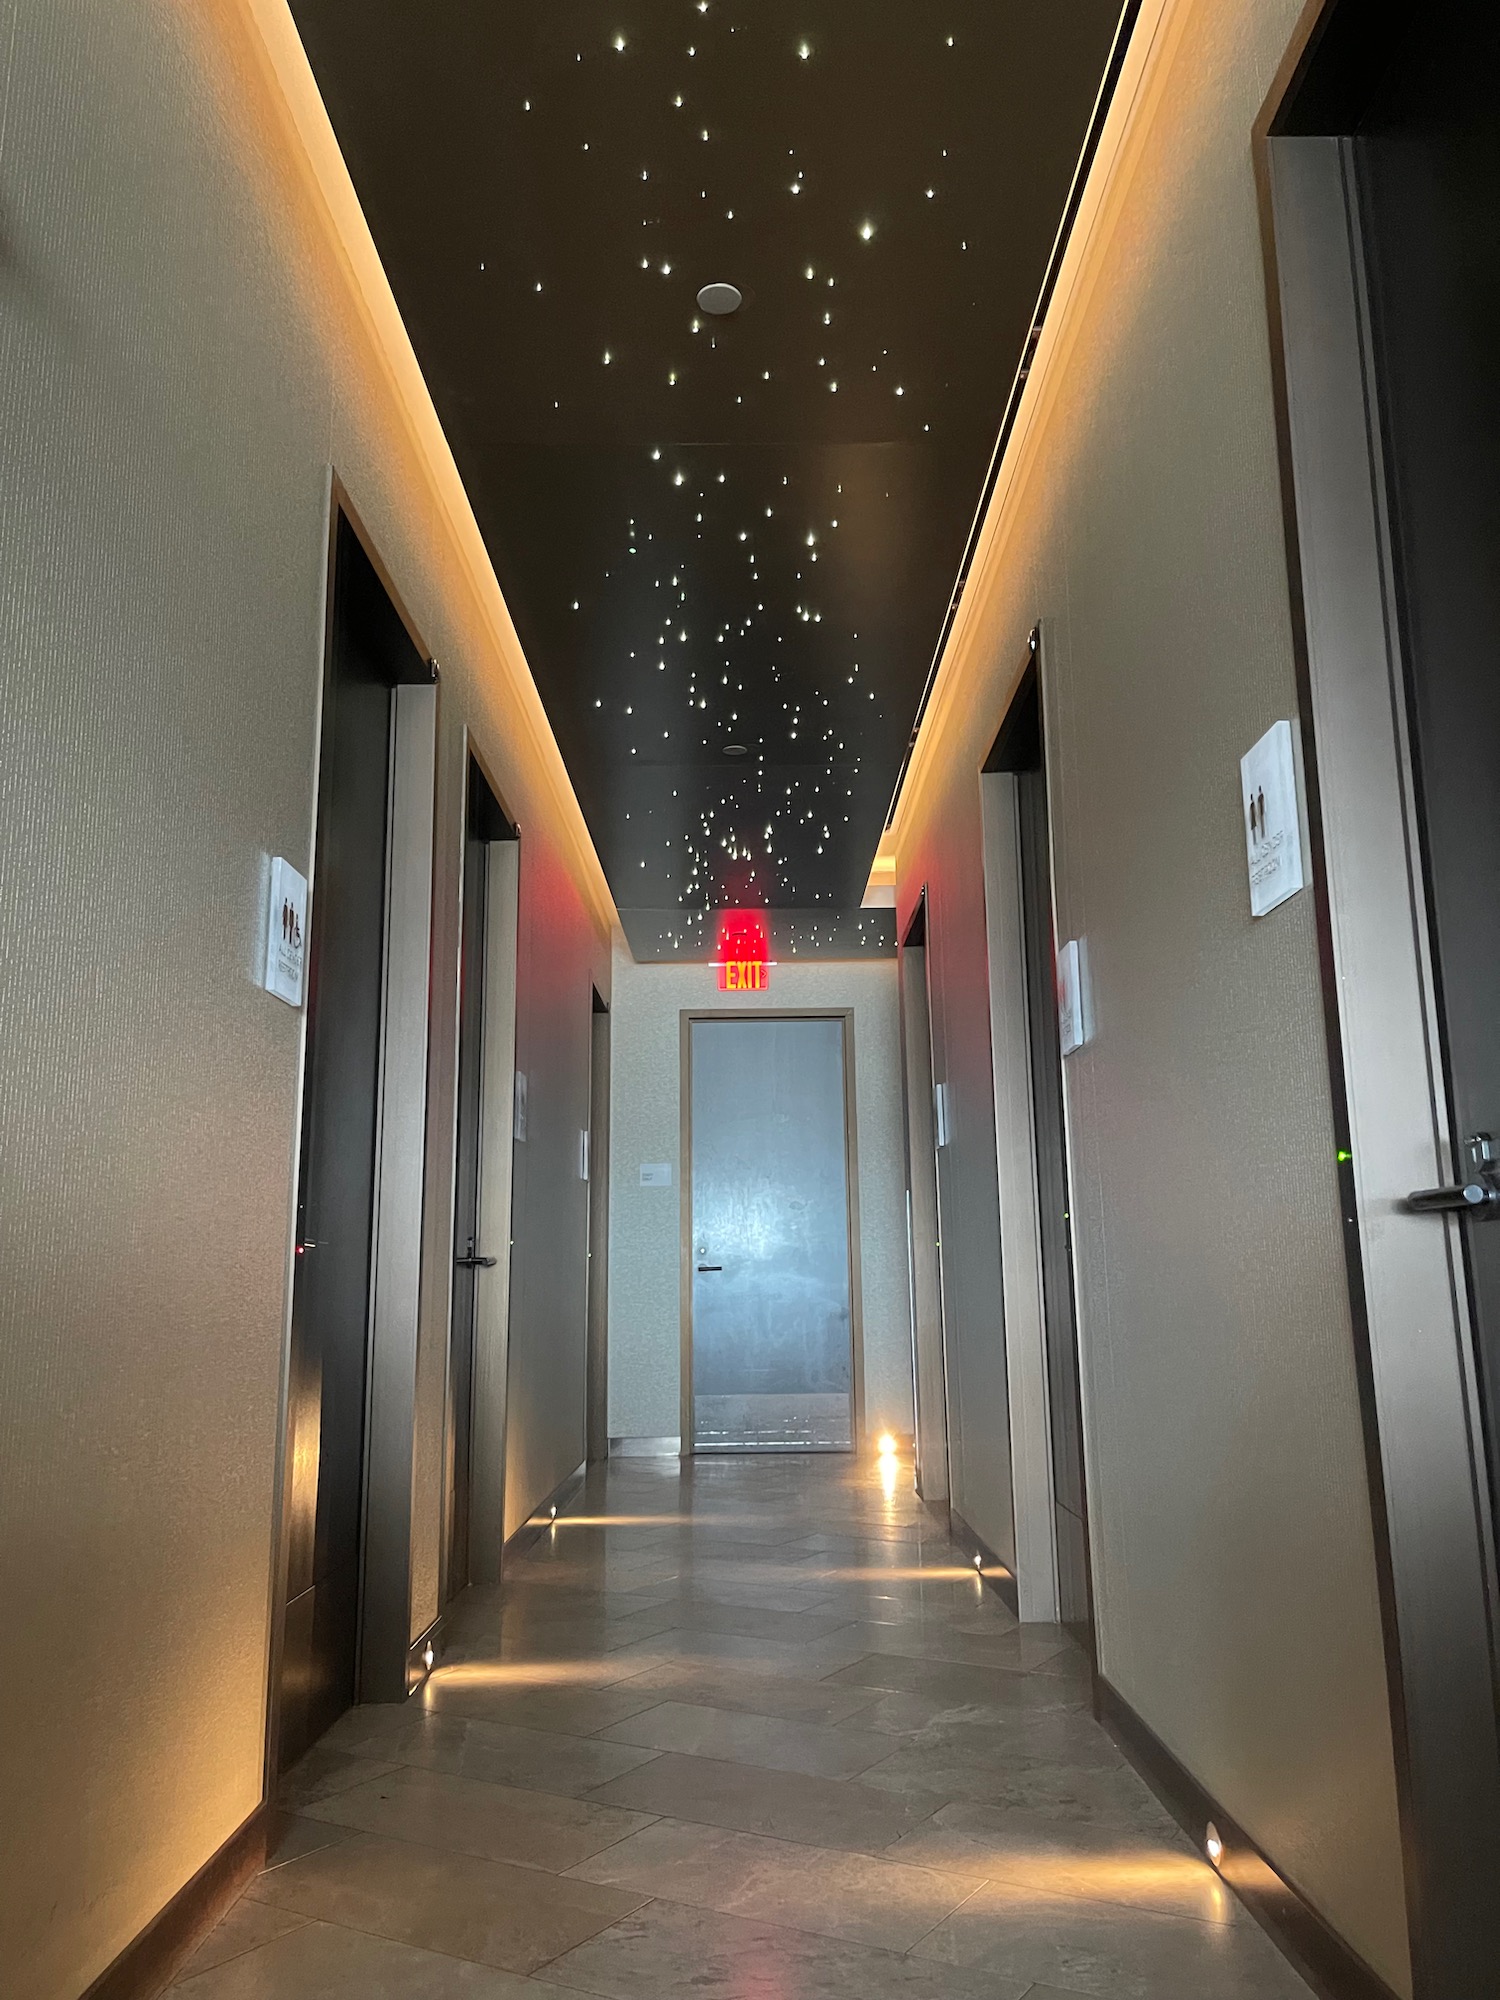 a hallway with lights on the ceiling